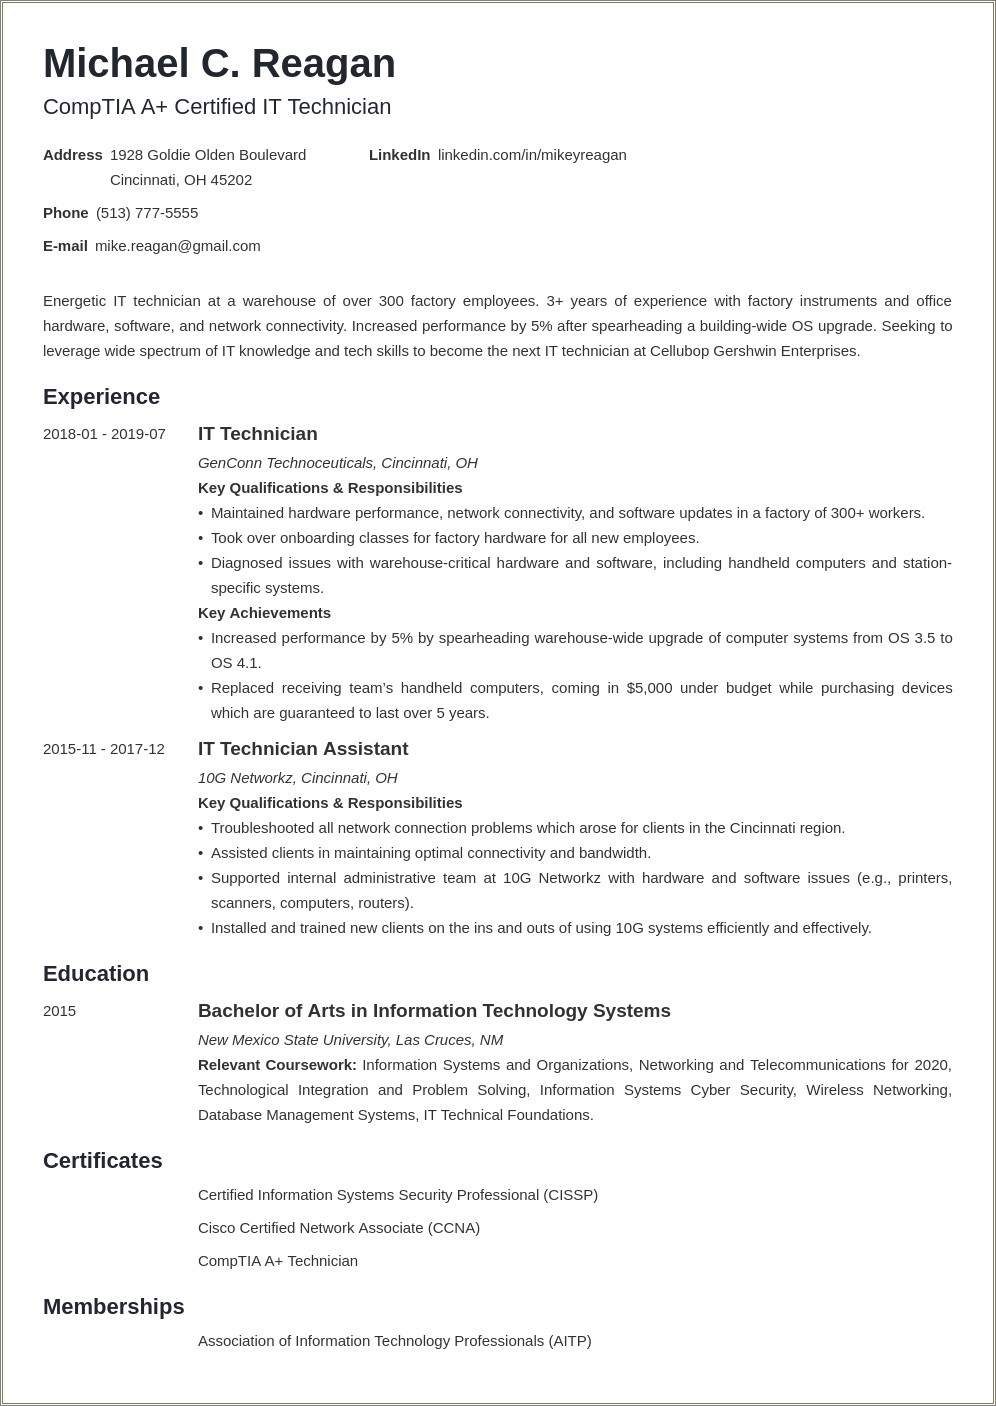 Resume Format For Telecommunication Technician Experience